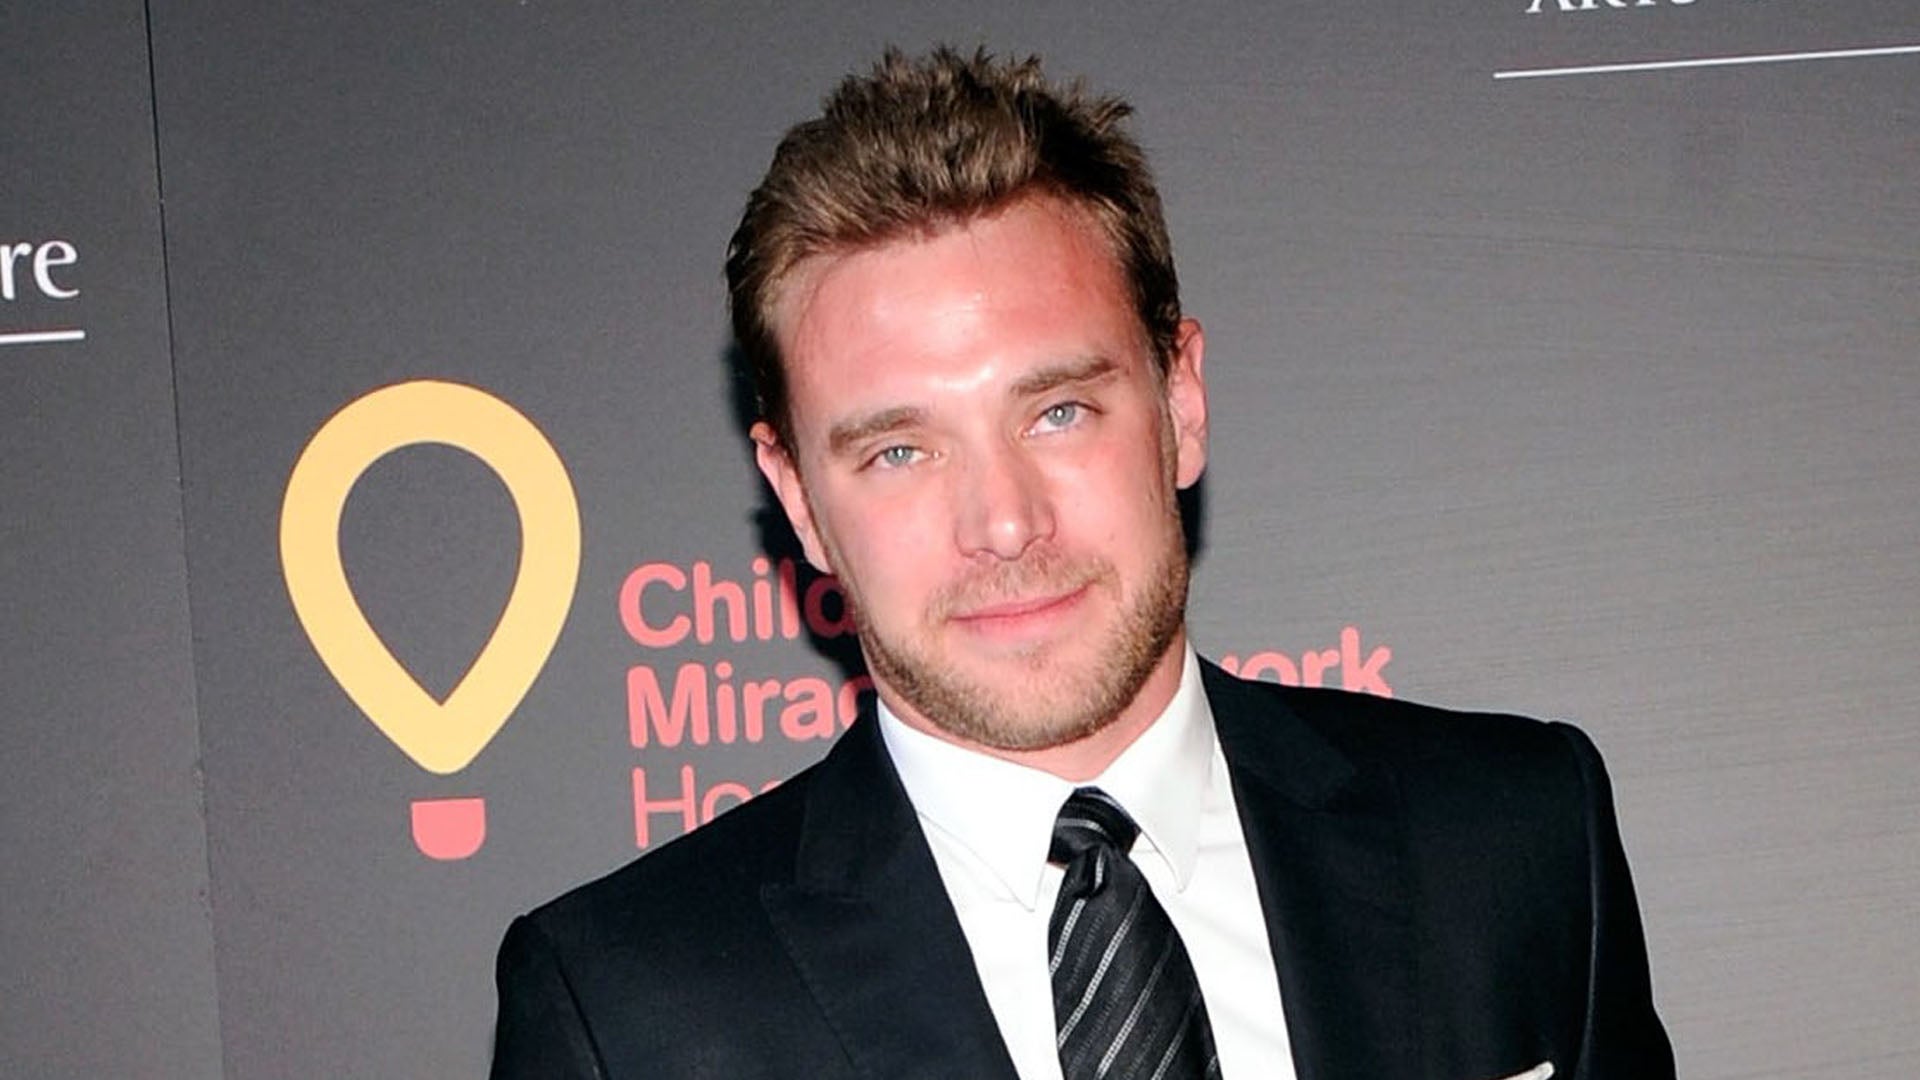 Billy Miller, 'General Hospital' and 'The Young and the Restless' Star, Dead at 43